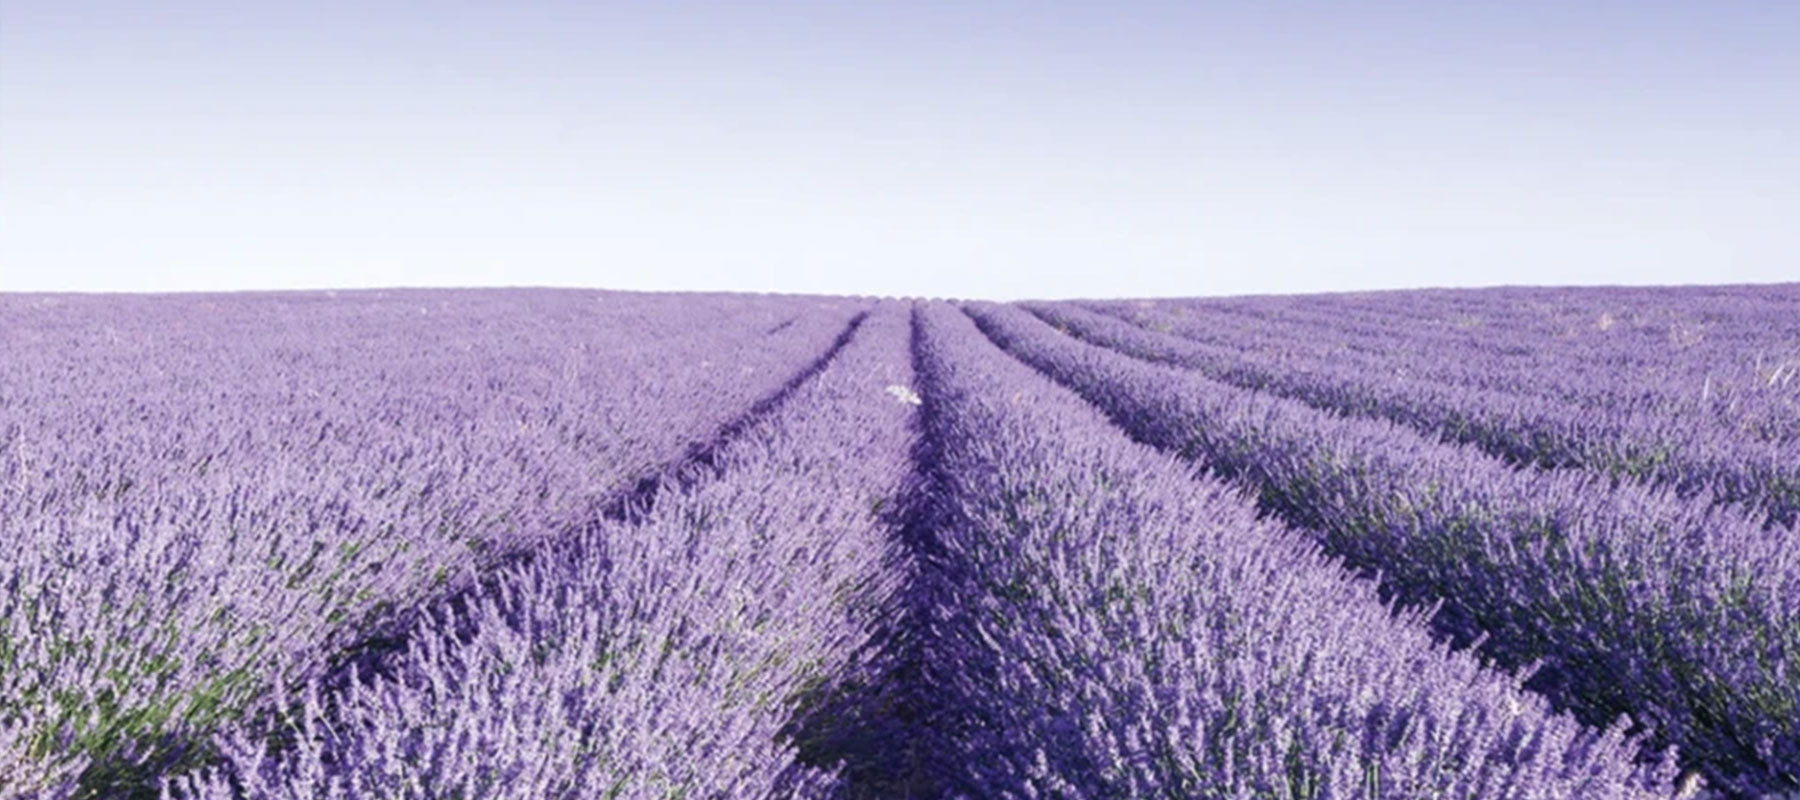 Enjoy Laundry Inspired by Mother Nature & French Lavender Fields!